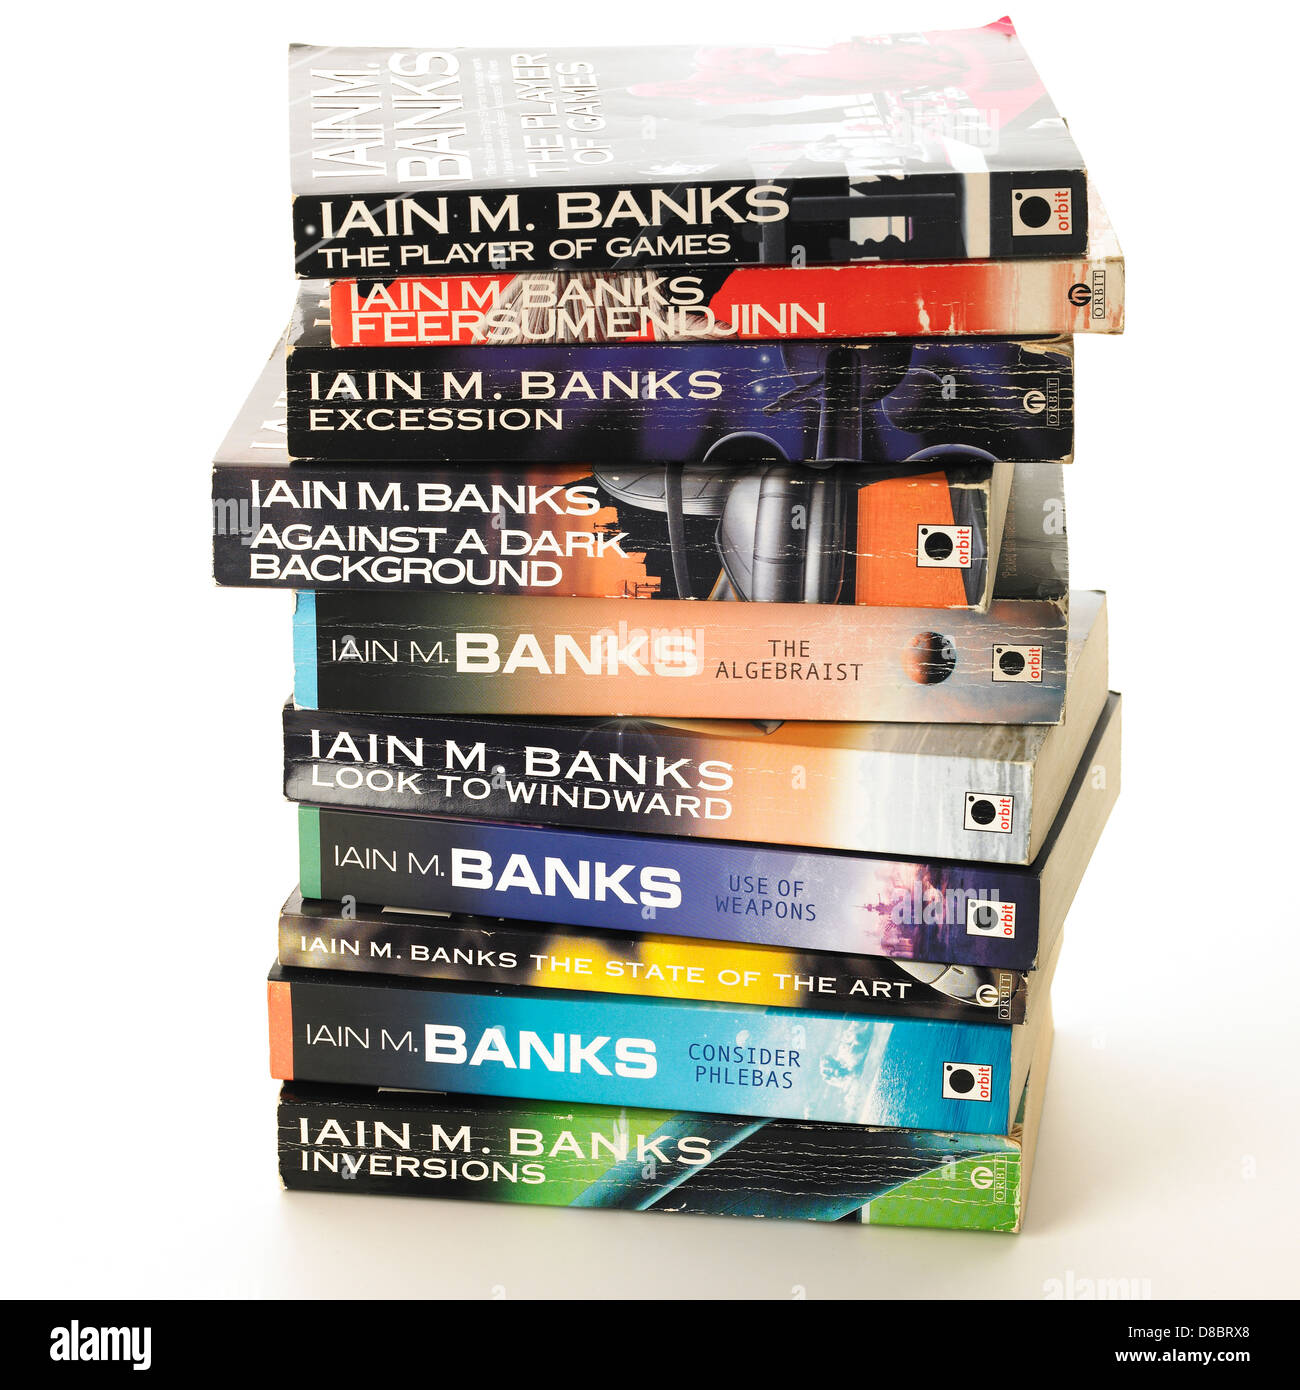 30 years of Culture: what are the top five Iain M Banks novels?, Iain Banks